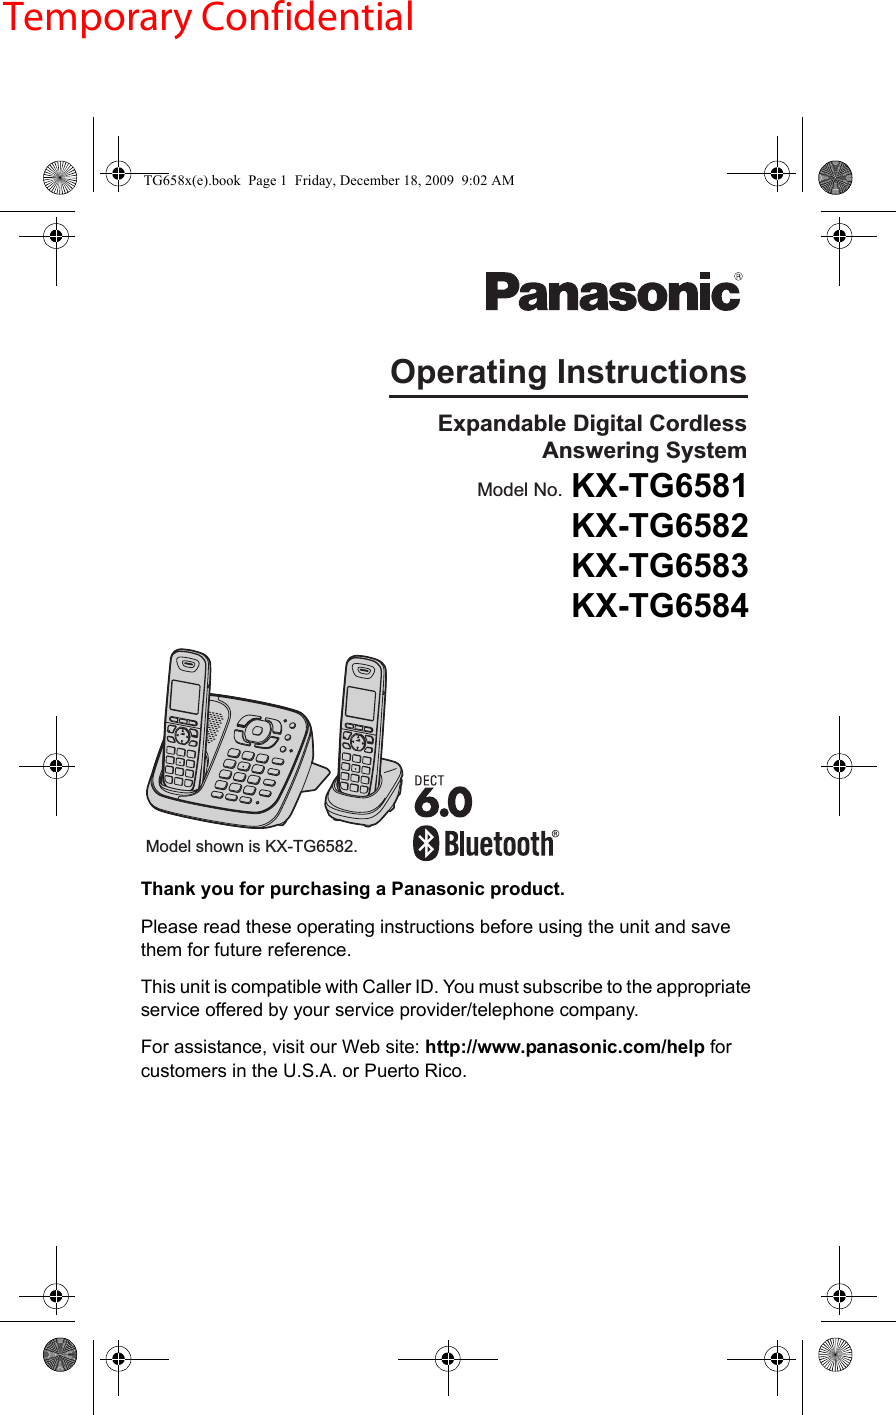 Thank you for purchasing a Panasonic product.Please read these operating instructions before using the unit and save them for future reference.This unit is compatible with Caller ID. You must subscribe to the appropriate service offered by your service provider/telephone company.For assistance, visit our Web site: http://www.panasonic.com/help for customers in the U.S.A. or Puerto Rico.Operating InstructionsModel shown is KX-TG6582. Expandable Digital Cordless  Answering SystemModel No. KX-TG6582KX-TG6583KX-TG6584TG658x(e).book  Page 1  Friday, December 18, 2009  9:02 AMTemporary ConfidentialKX-TG6581  KX-TG6582  KX-TG6583  KX-TG6584  